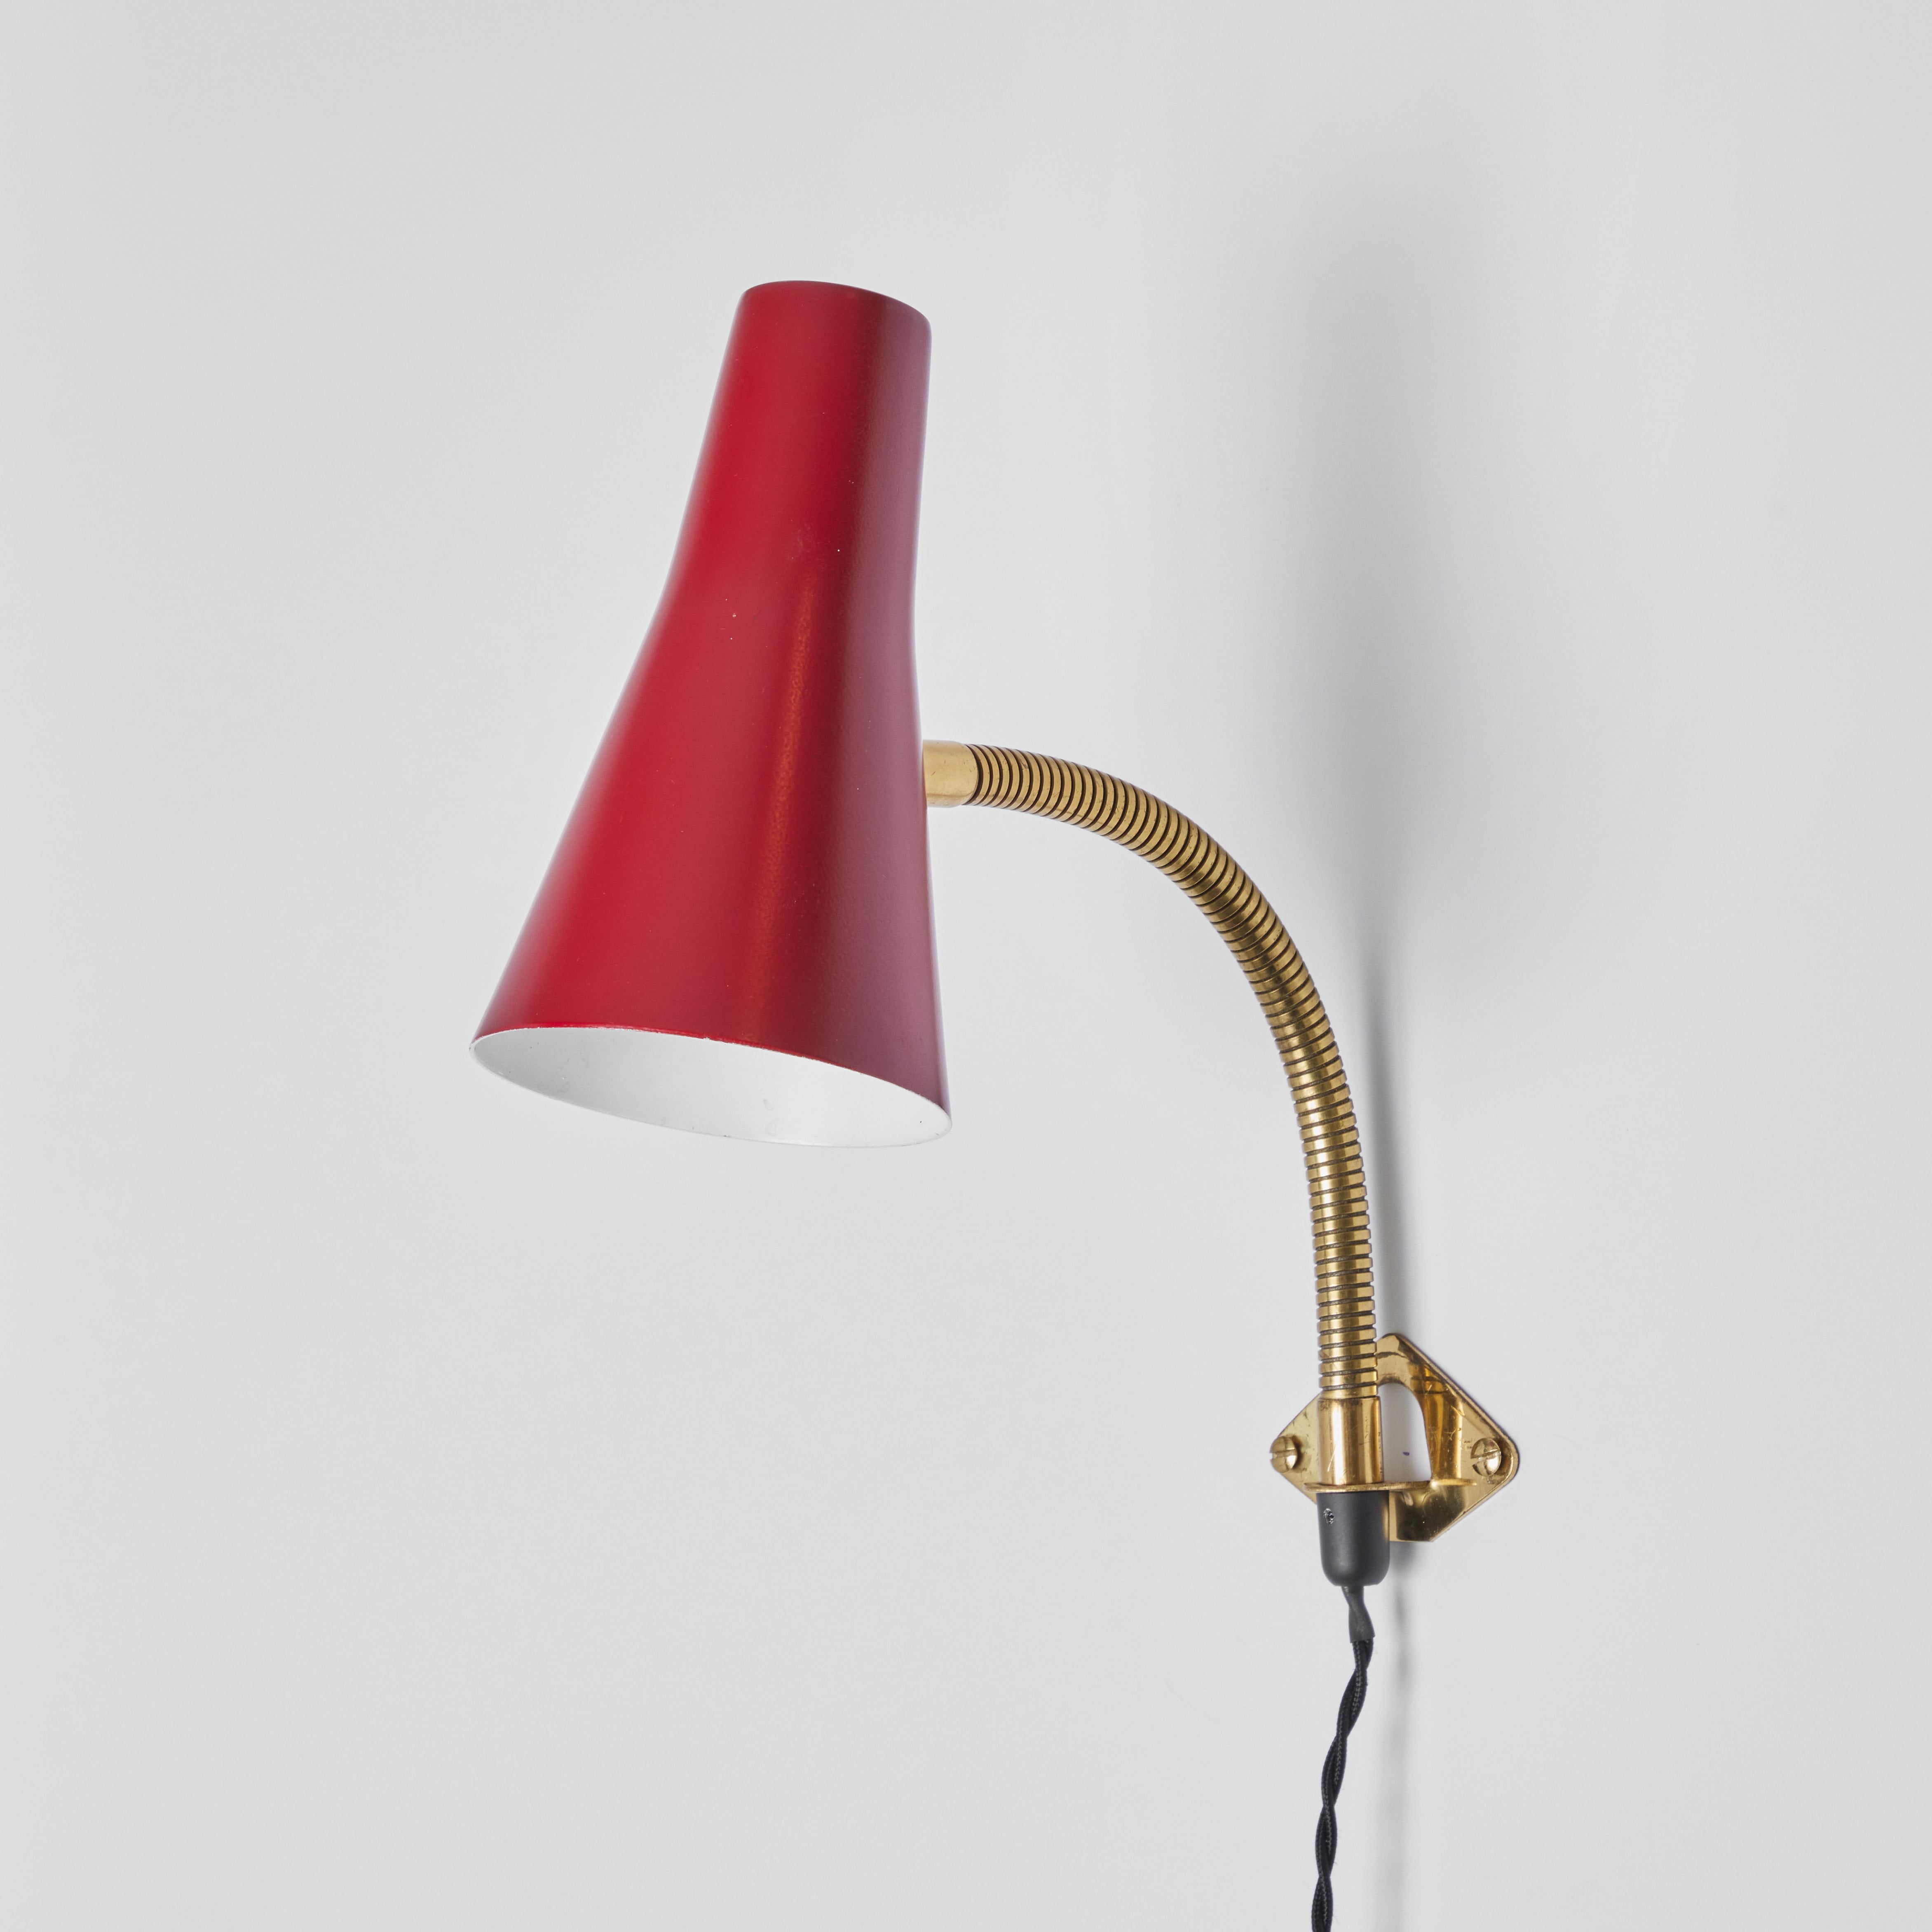 Pair of 1950s Lisa Johansson Pape Red Adjustable Wall Lights for Stockmann Orno For Sale 1